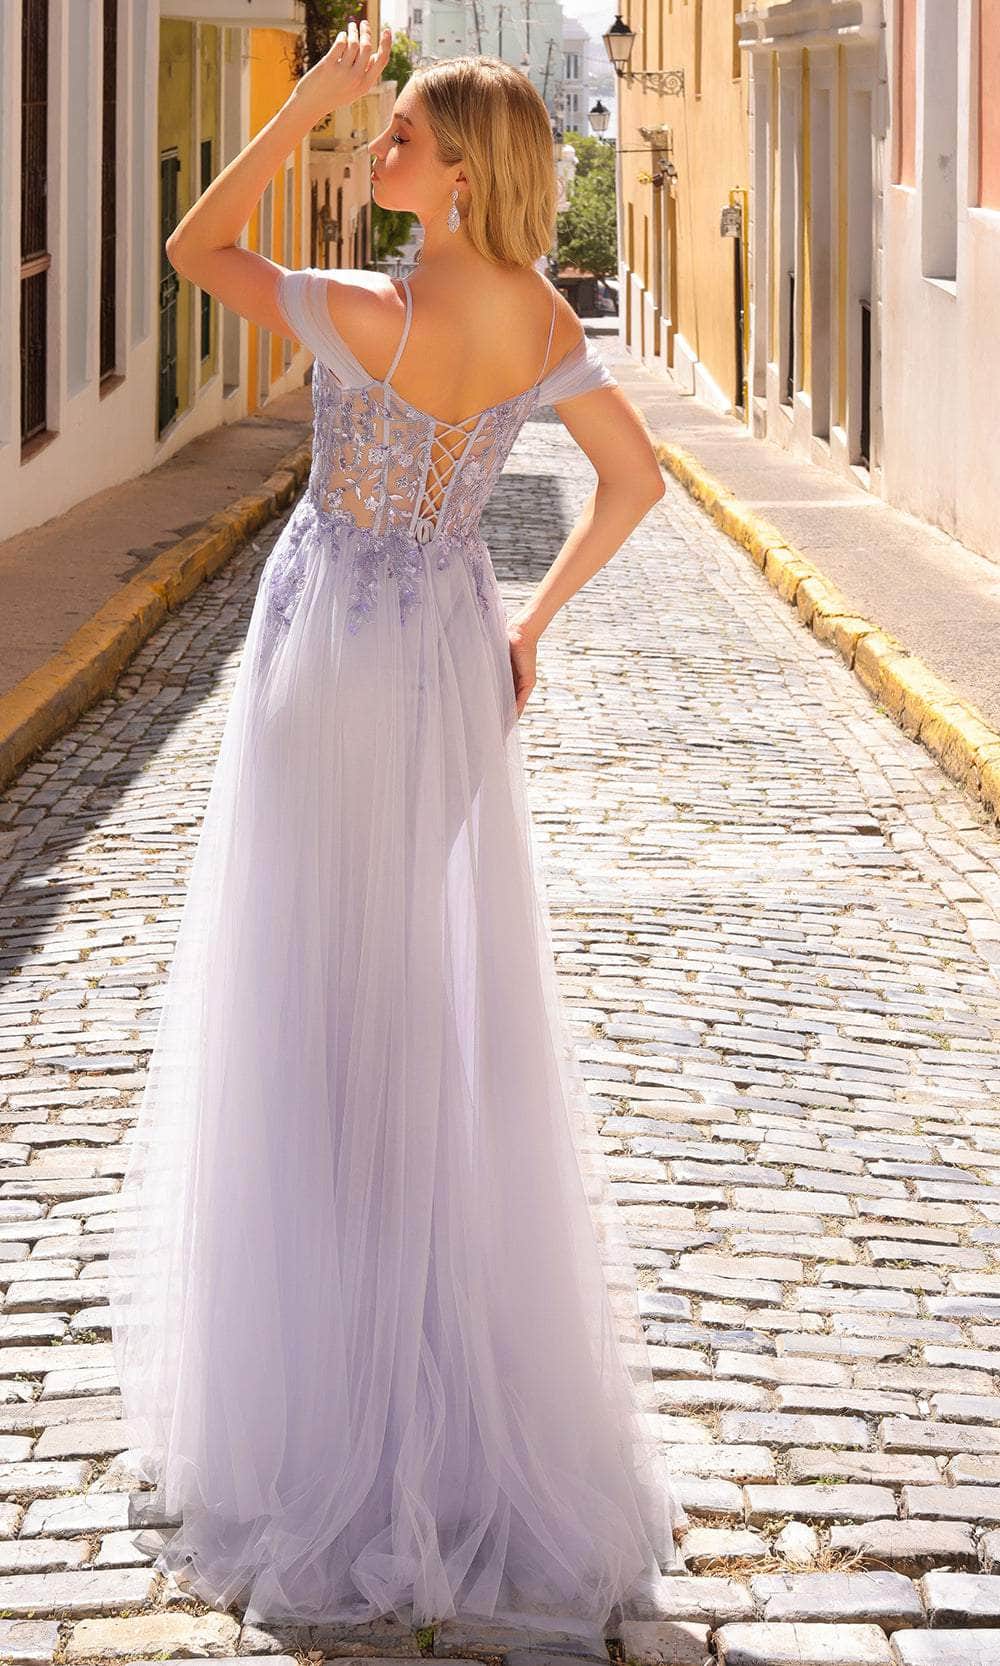 Nox Anabel L1362 - Floral Embroidered Plunging Neck Gown Prom Gown 